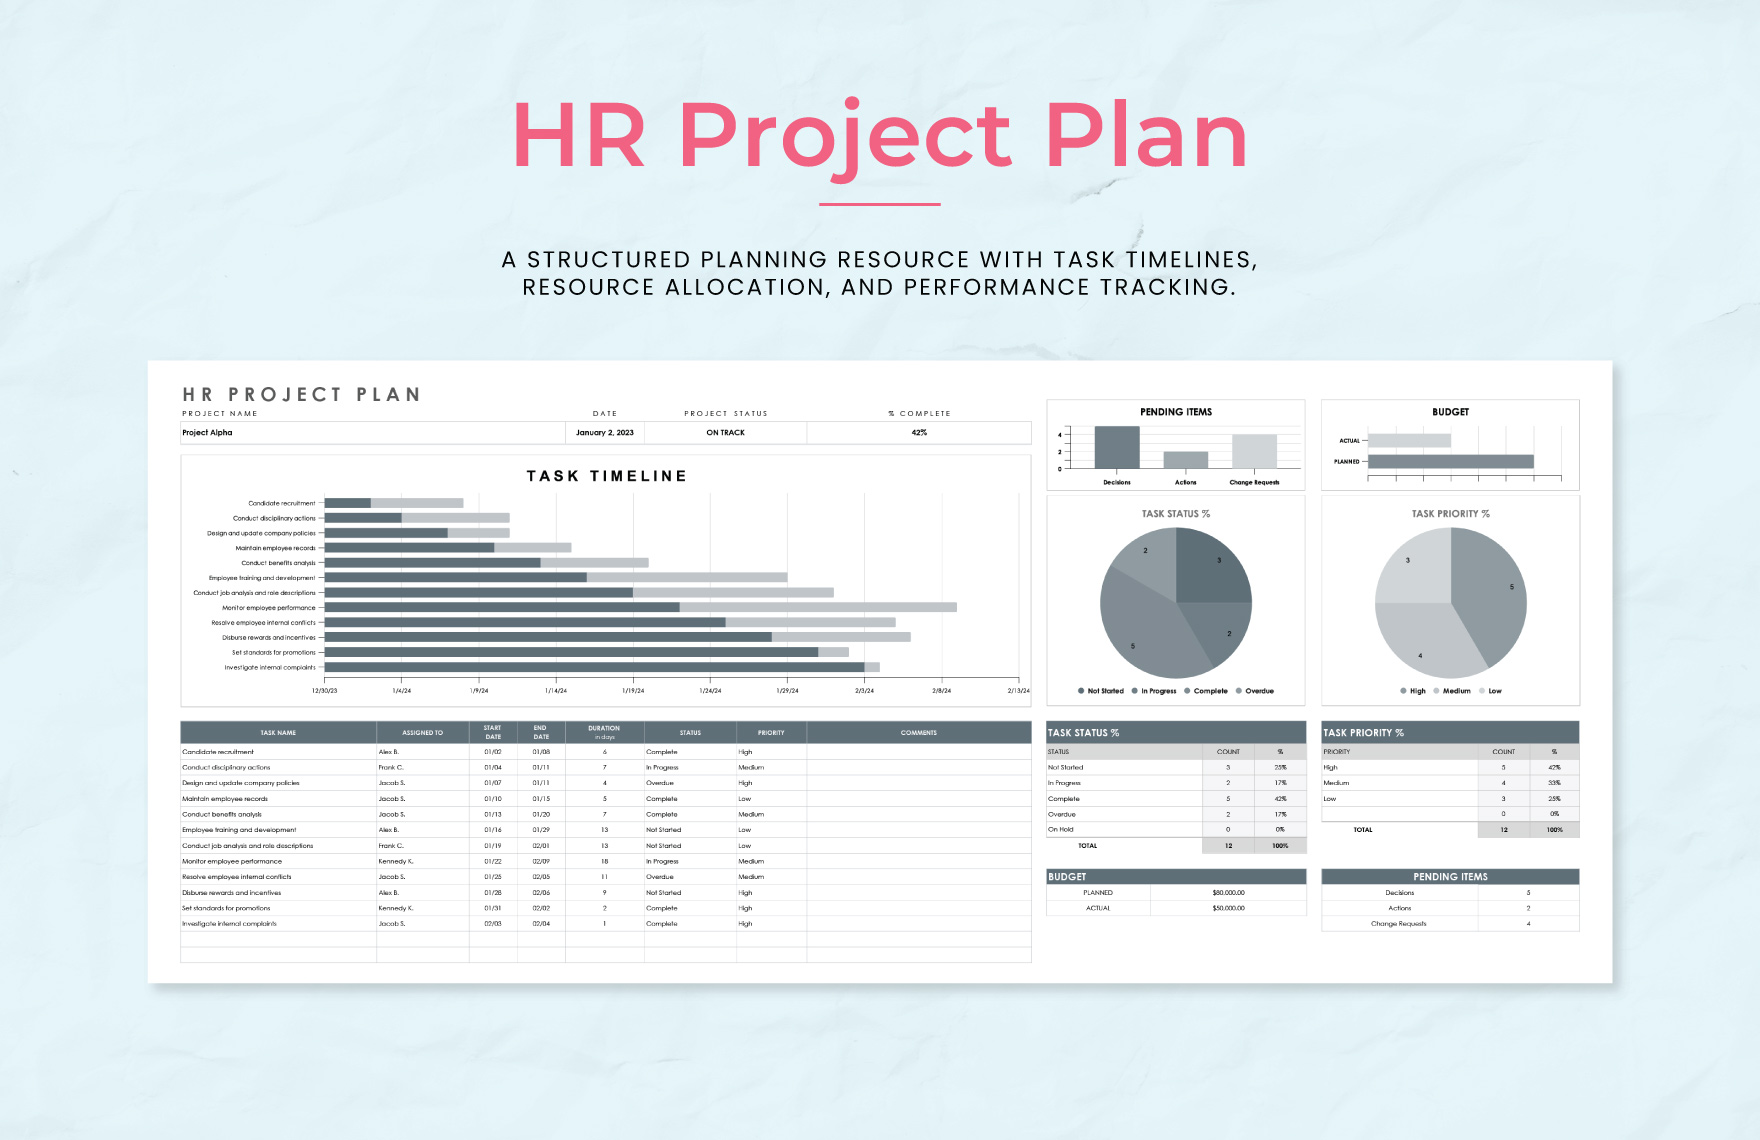 HR Project Plan Template